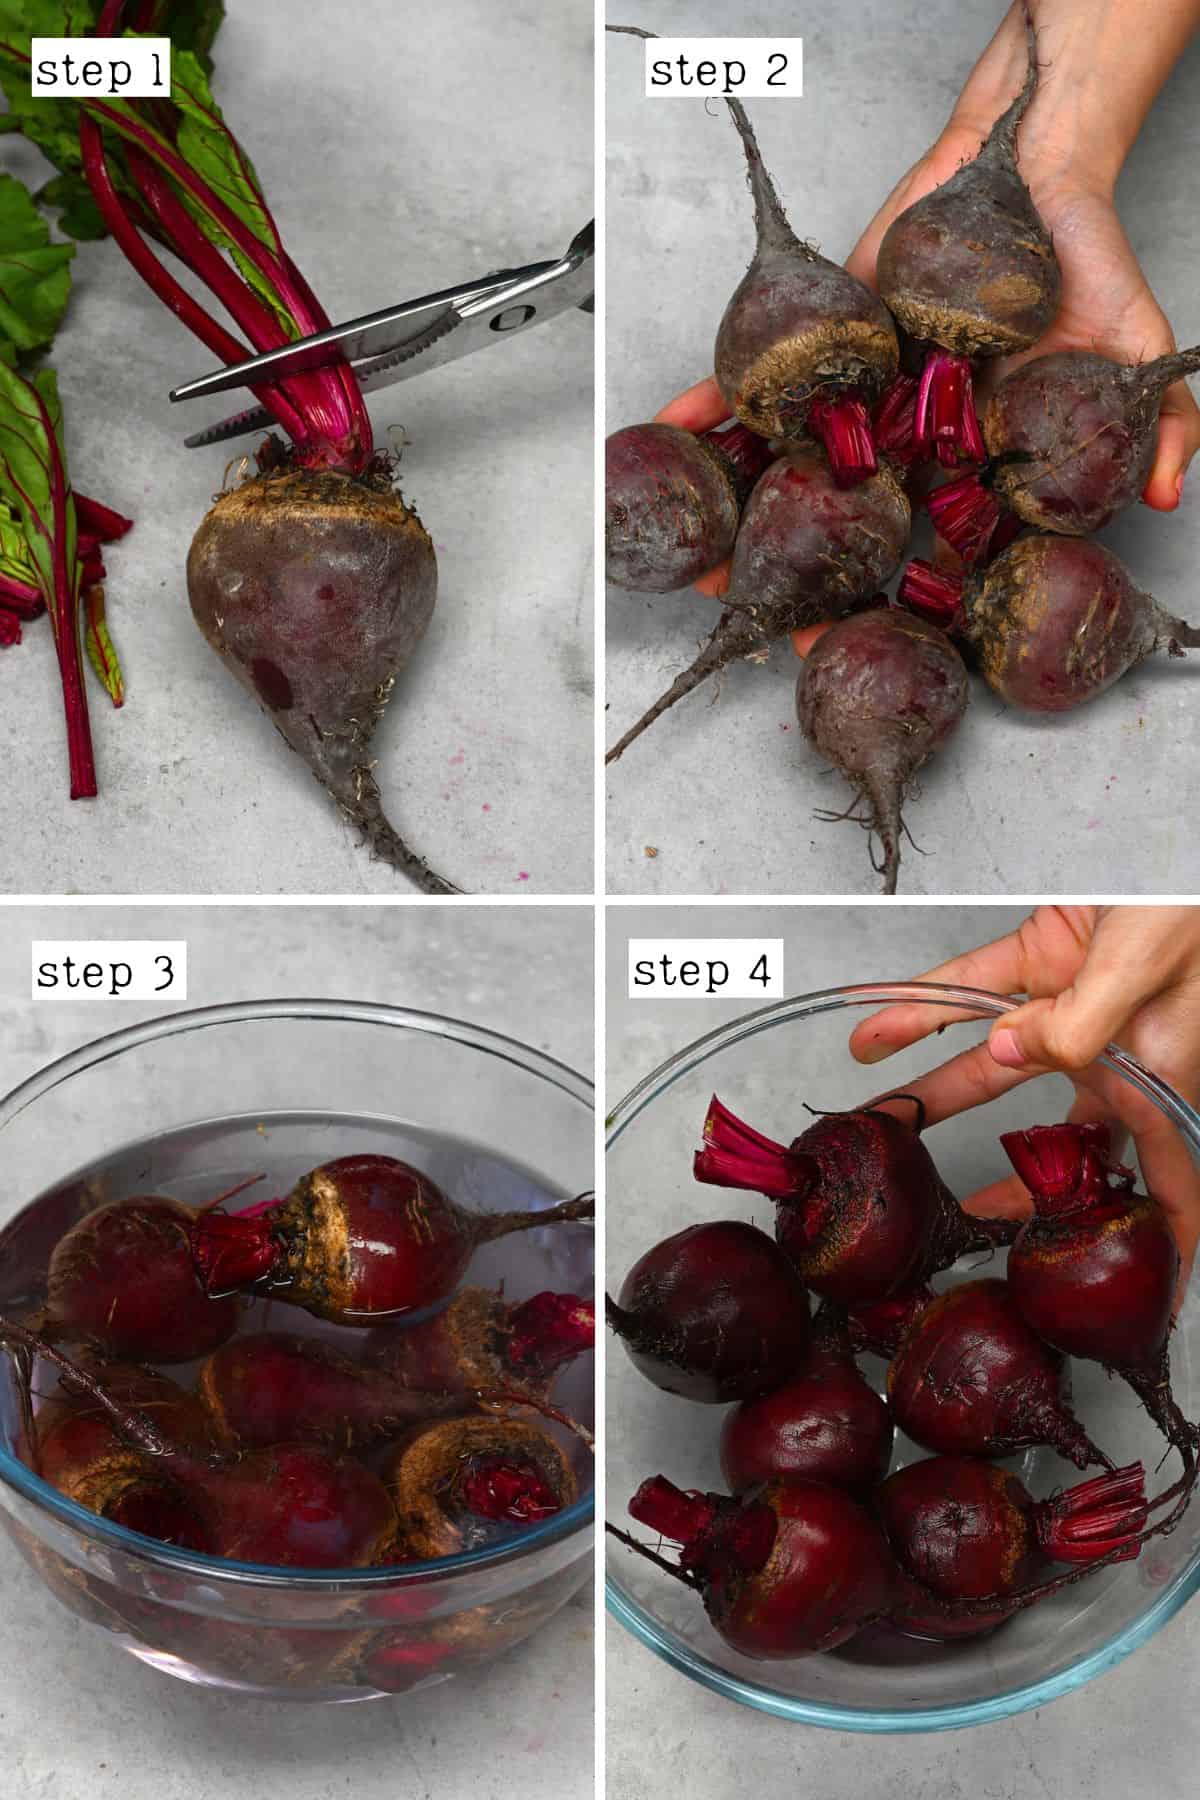 Steps for cleaning beetroot